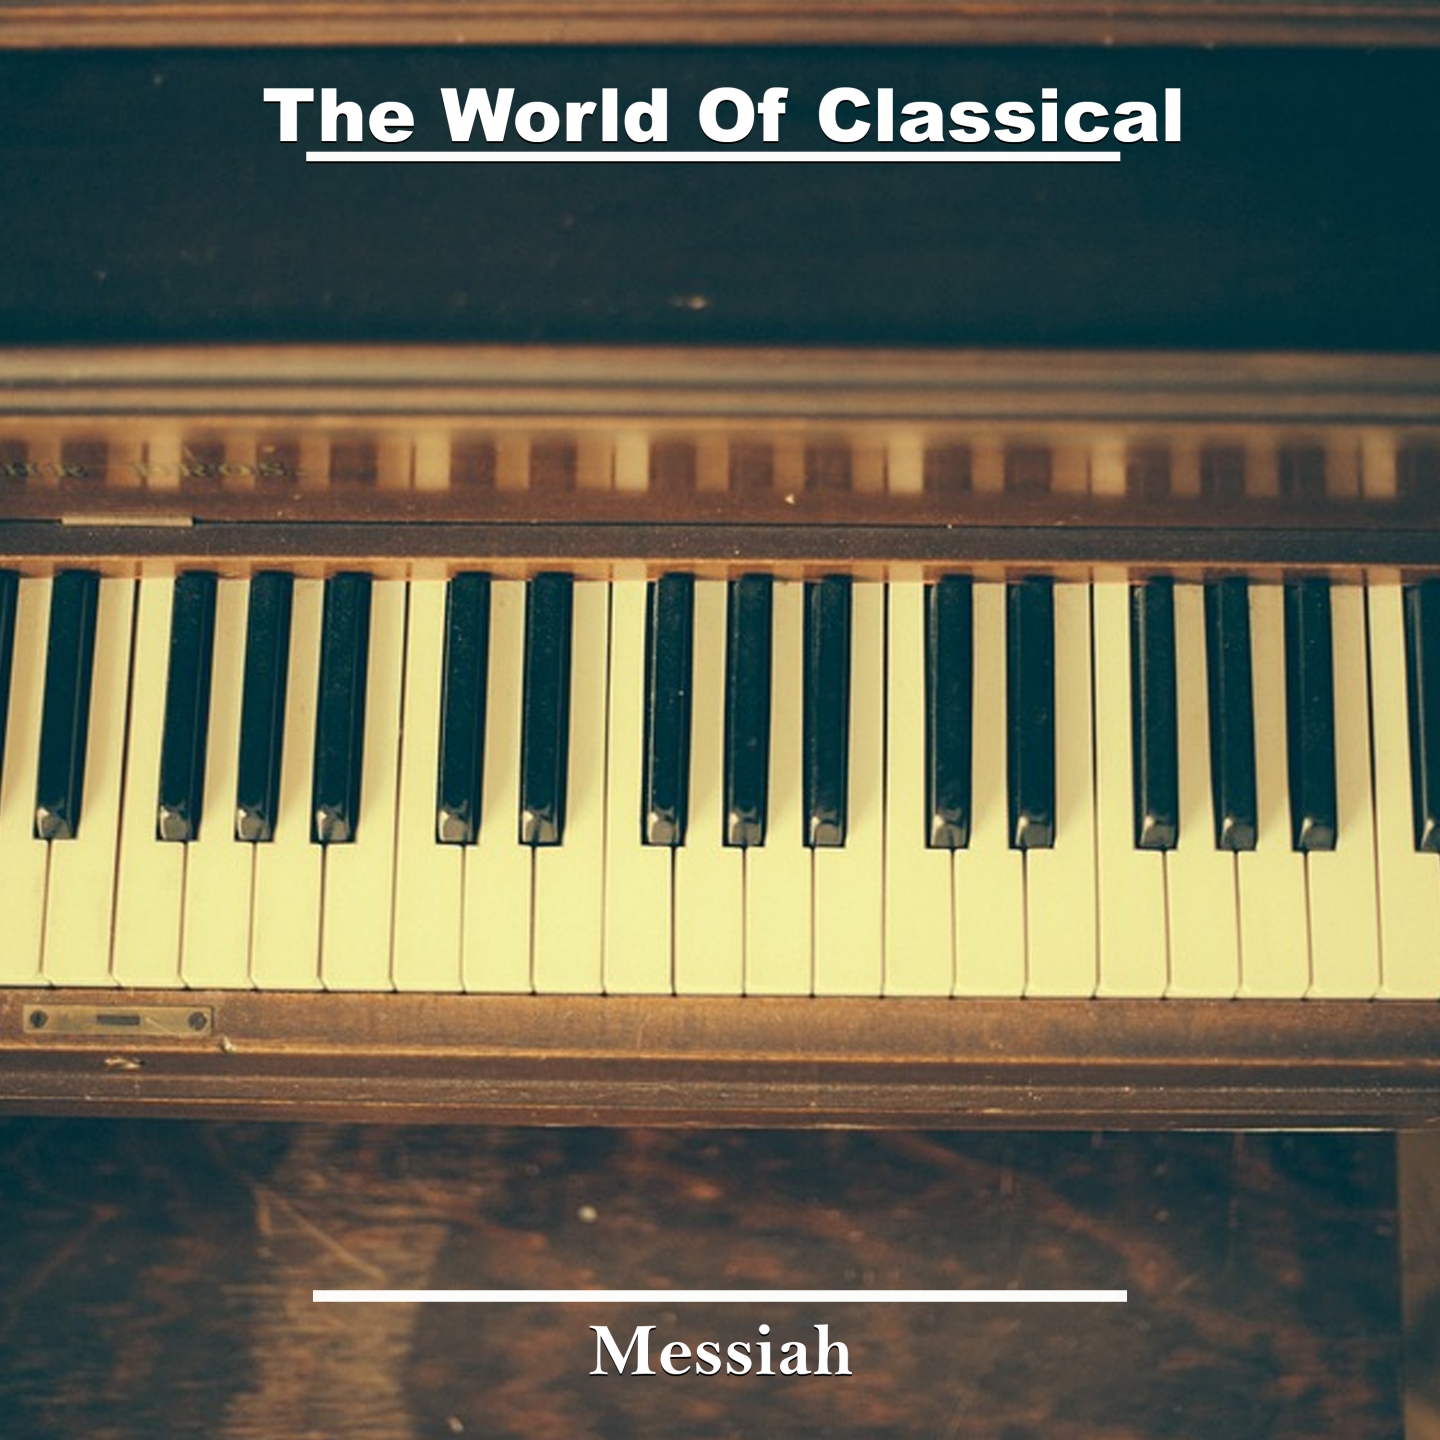 The World of Classical Music (Messiah)